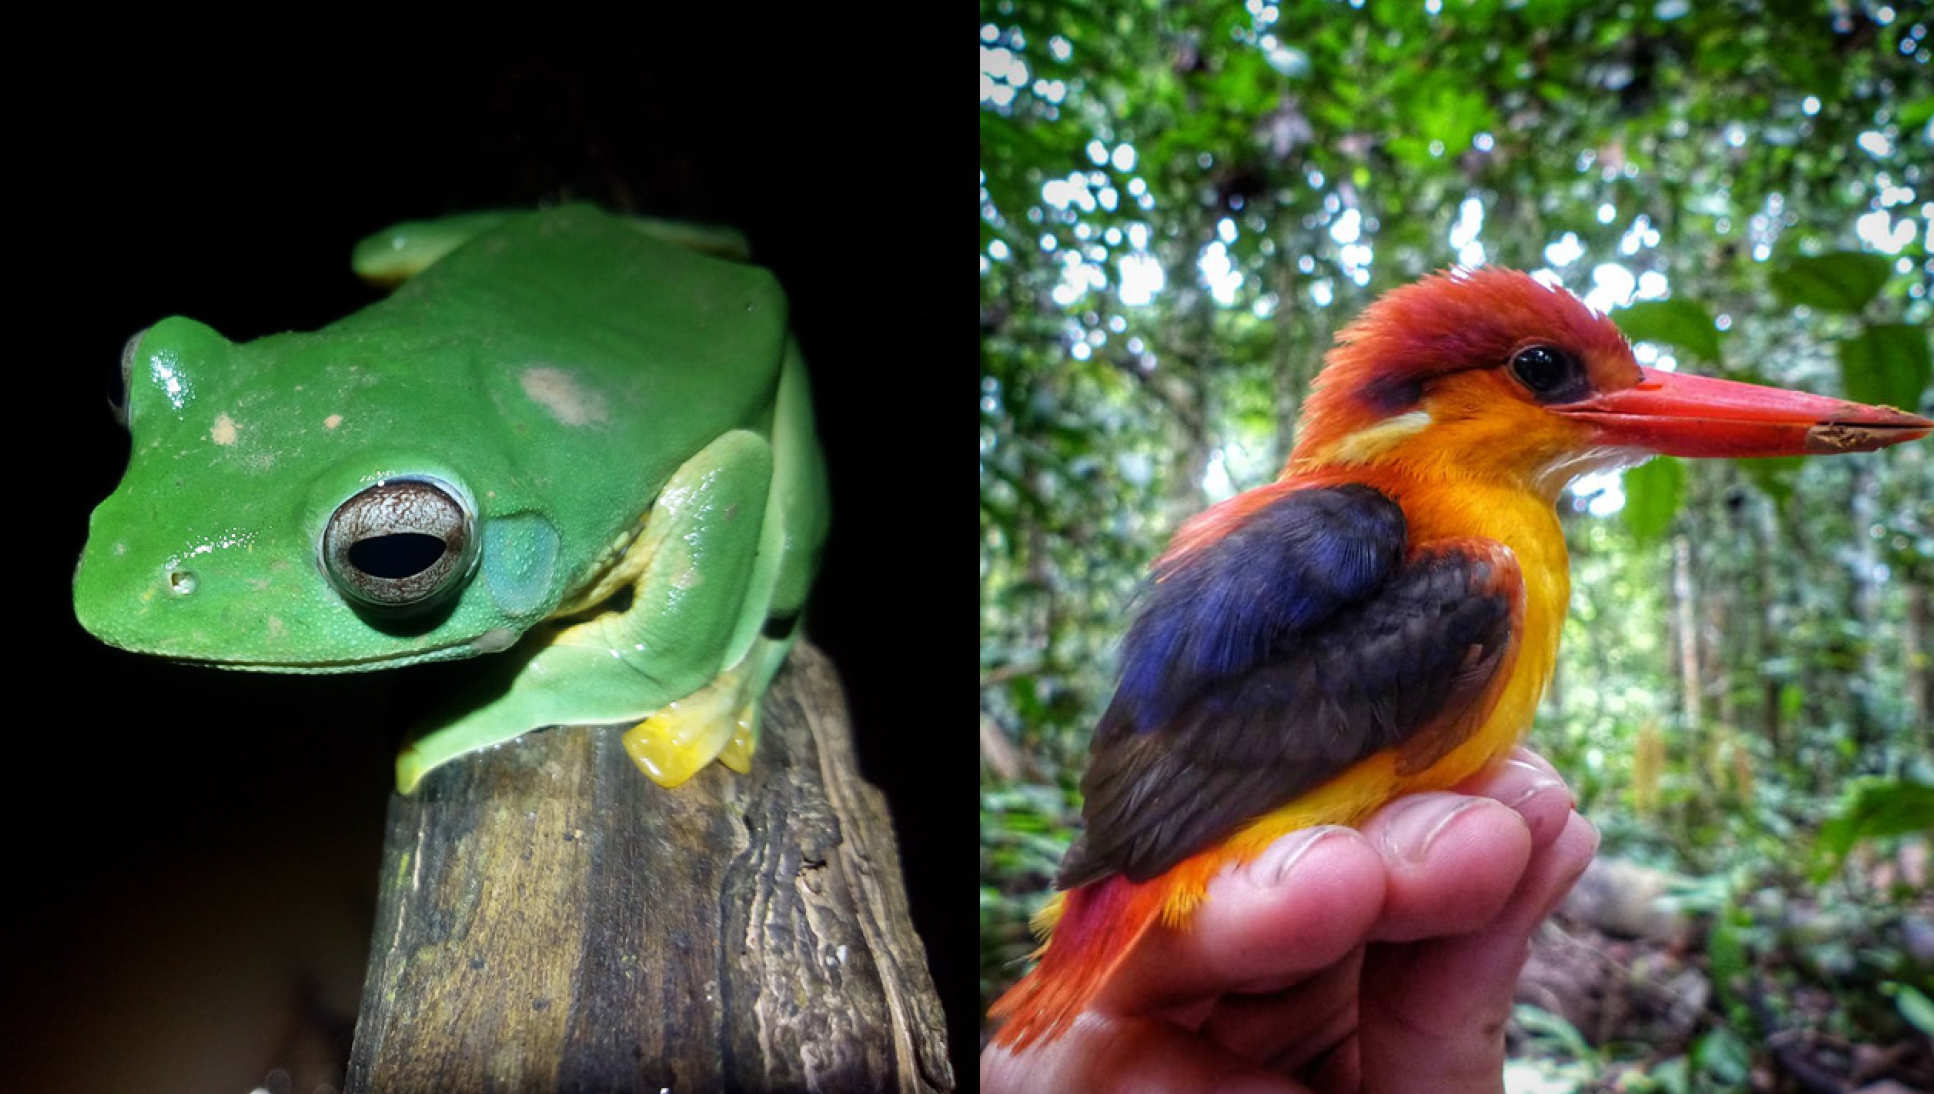 A frog and a bird